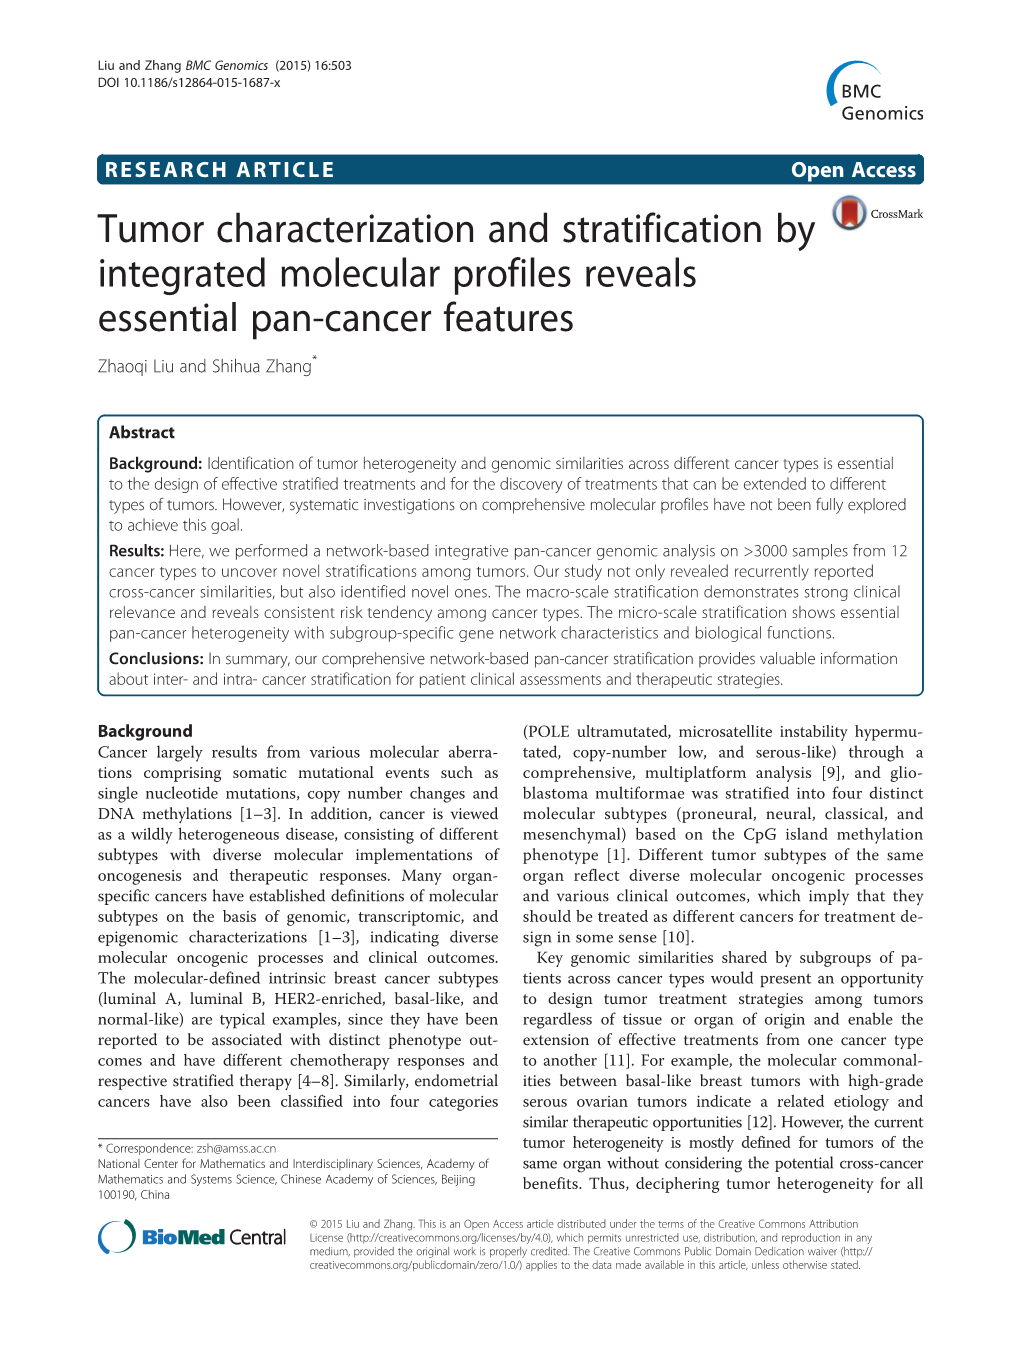 Tumor Characterization and Stratification by Integrated Molecular Profiles Reveals Essential Pan-Cancer Features Zhaoqi Liu and Shihua Zhang*